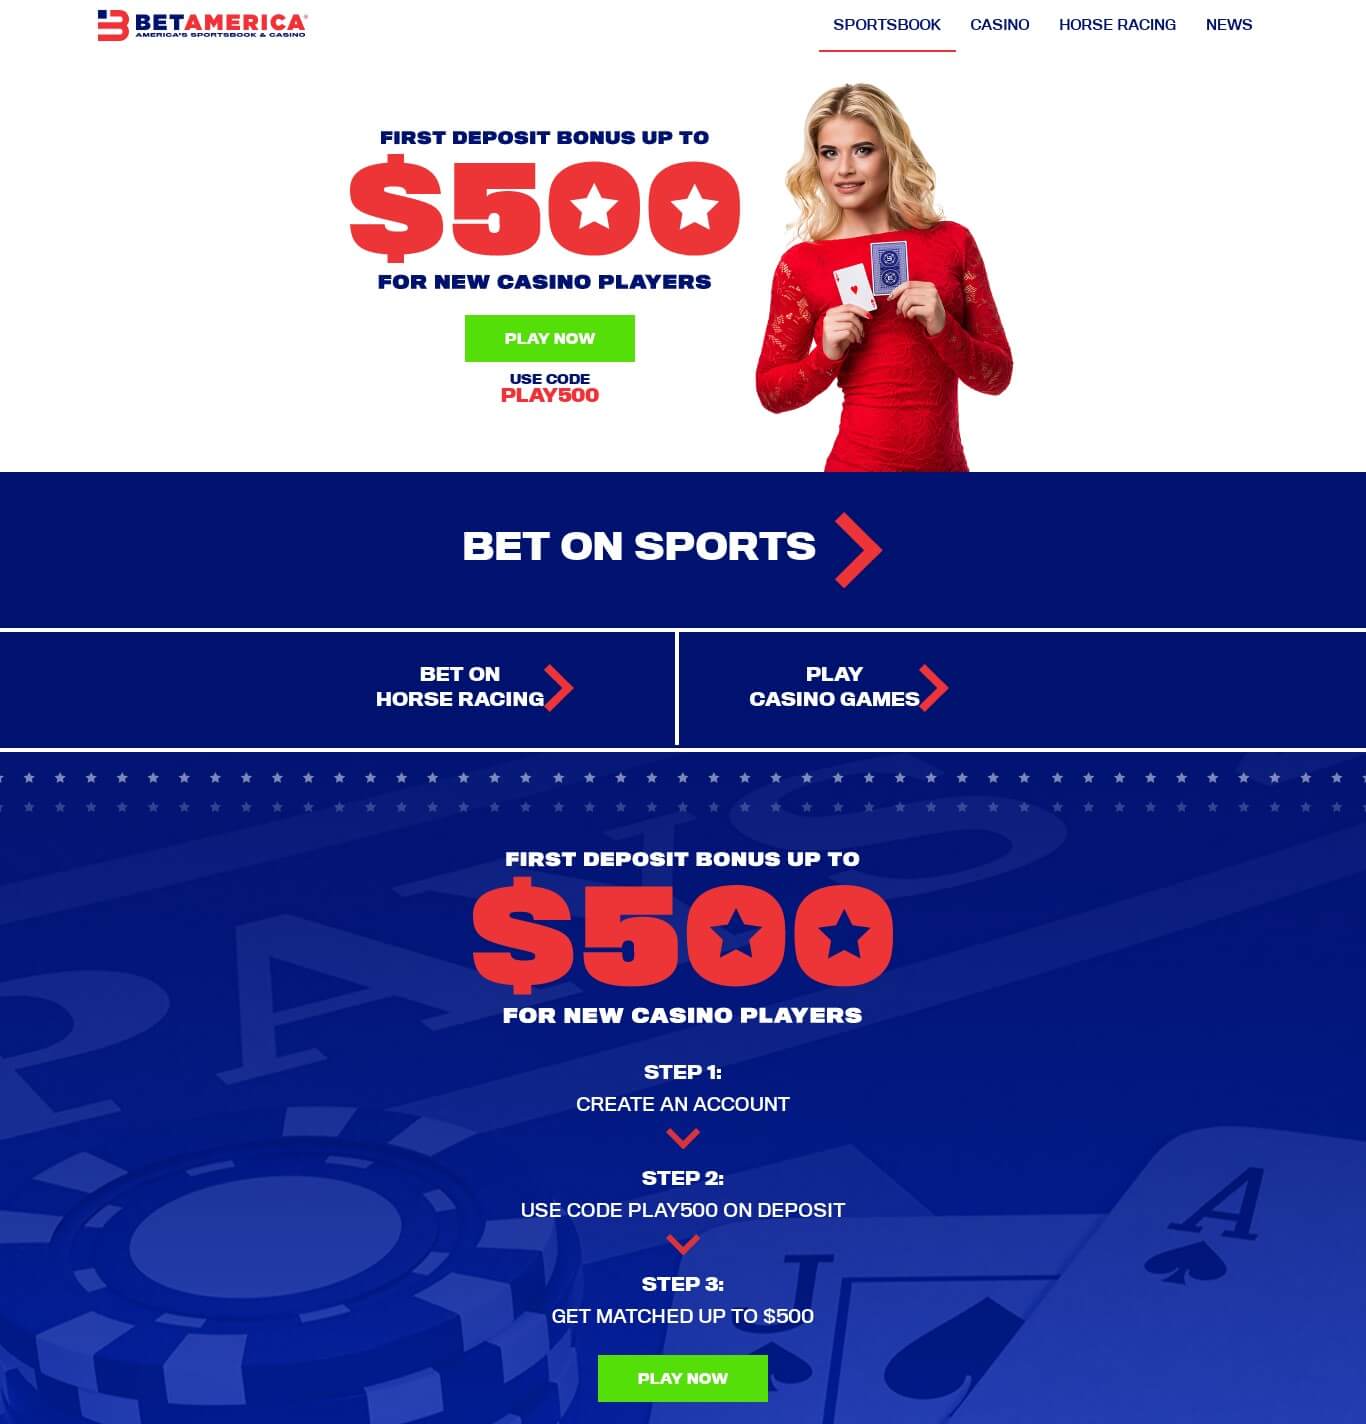 The Philosophy Of asian bookies, asian bookmakers, online betting malaysia, asian betting sites, best asian bookmakers, asian sports bookmakers, sports betting malaysia, online sports betting malaysia, singapore online sportsbook